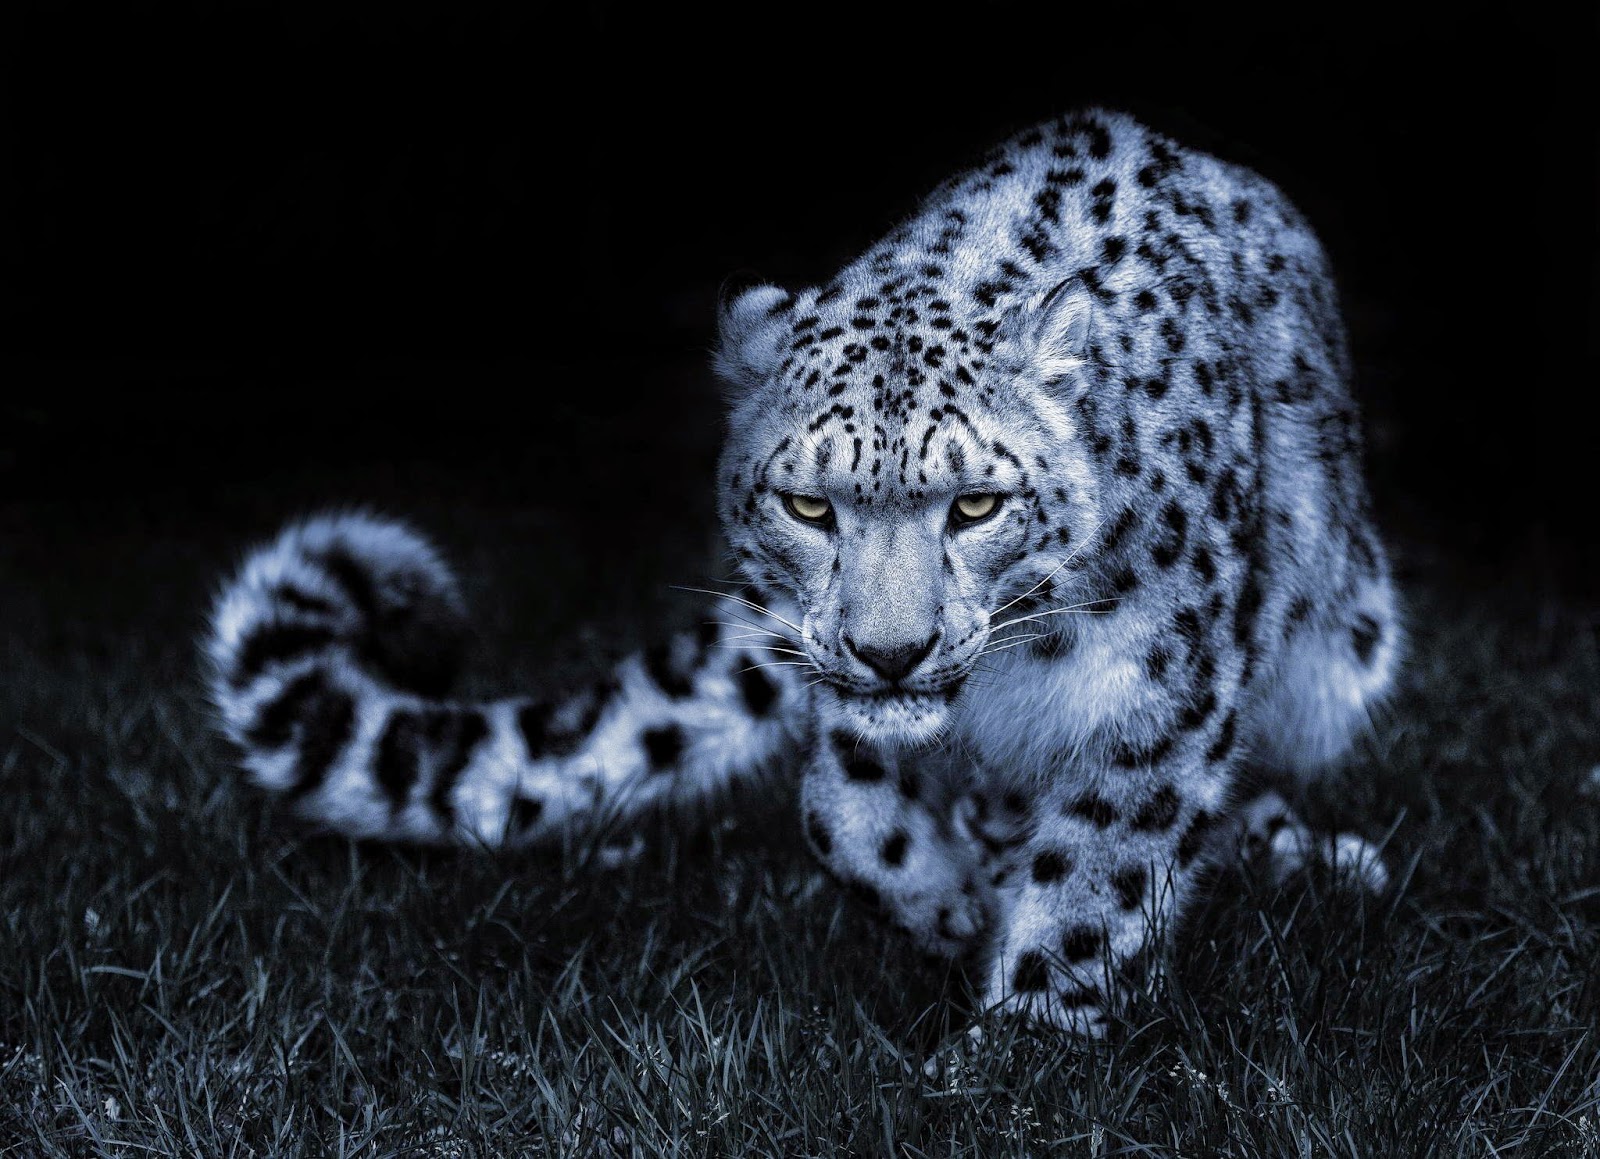 Snow Leopard Black And White Posture Eyes Cat